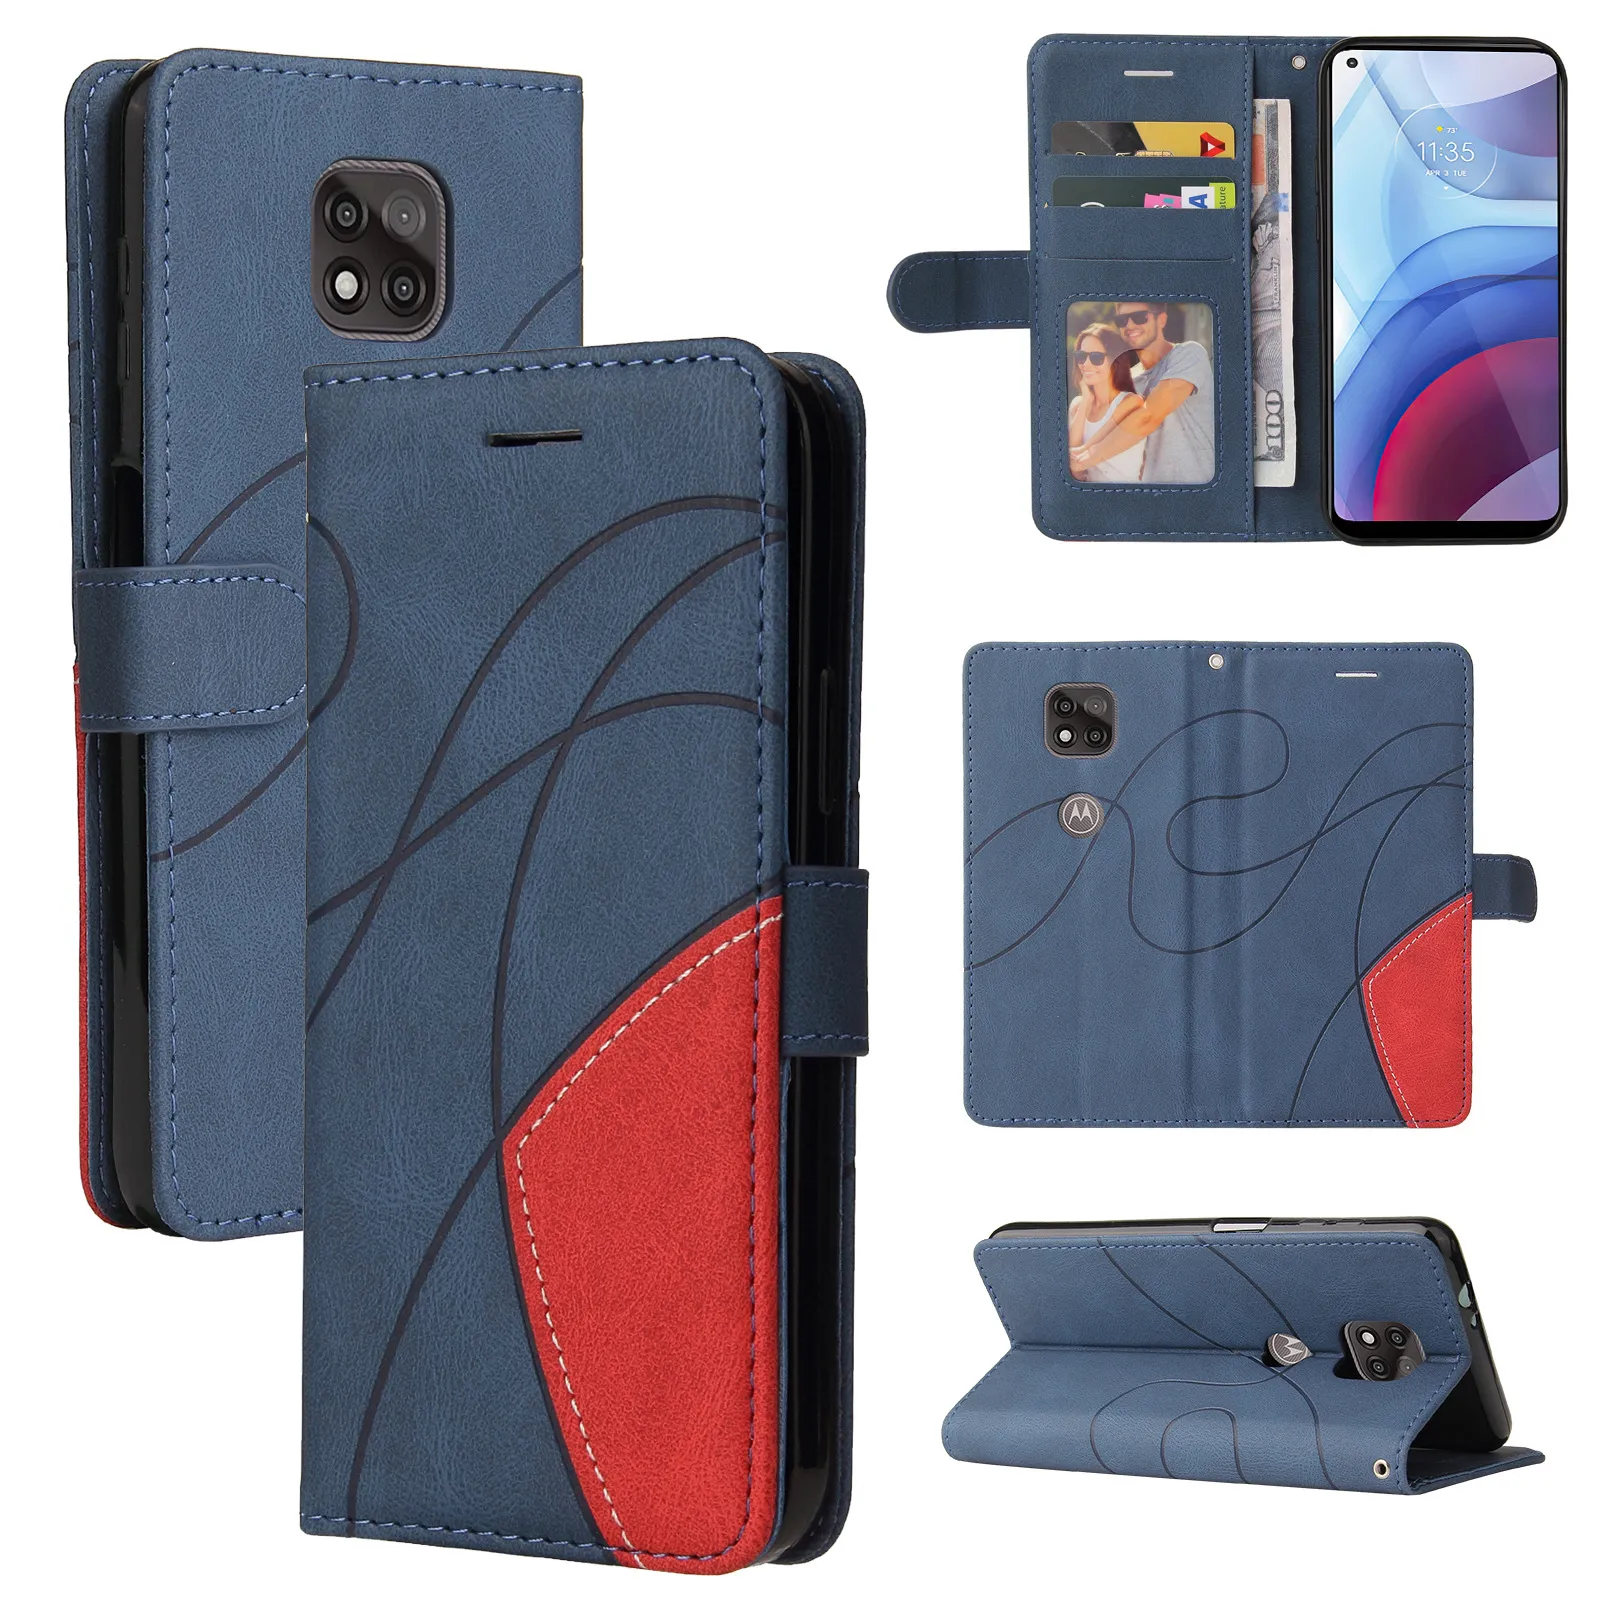 Dual Color Abstract Contrast Wallet Cases With Card Slot For Moto G9 Play G10 G30 G50 G60 G Power 2021 Edge 20 Lite E20 E30 E40 One Plus 9 Pro Nord N10 N100 N200